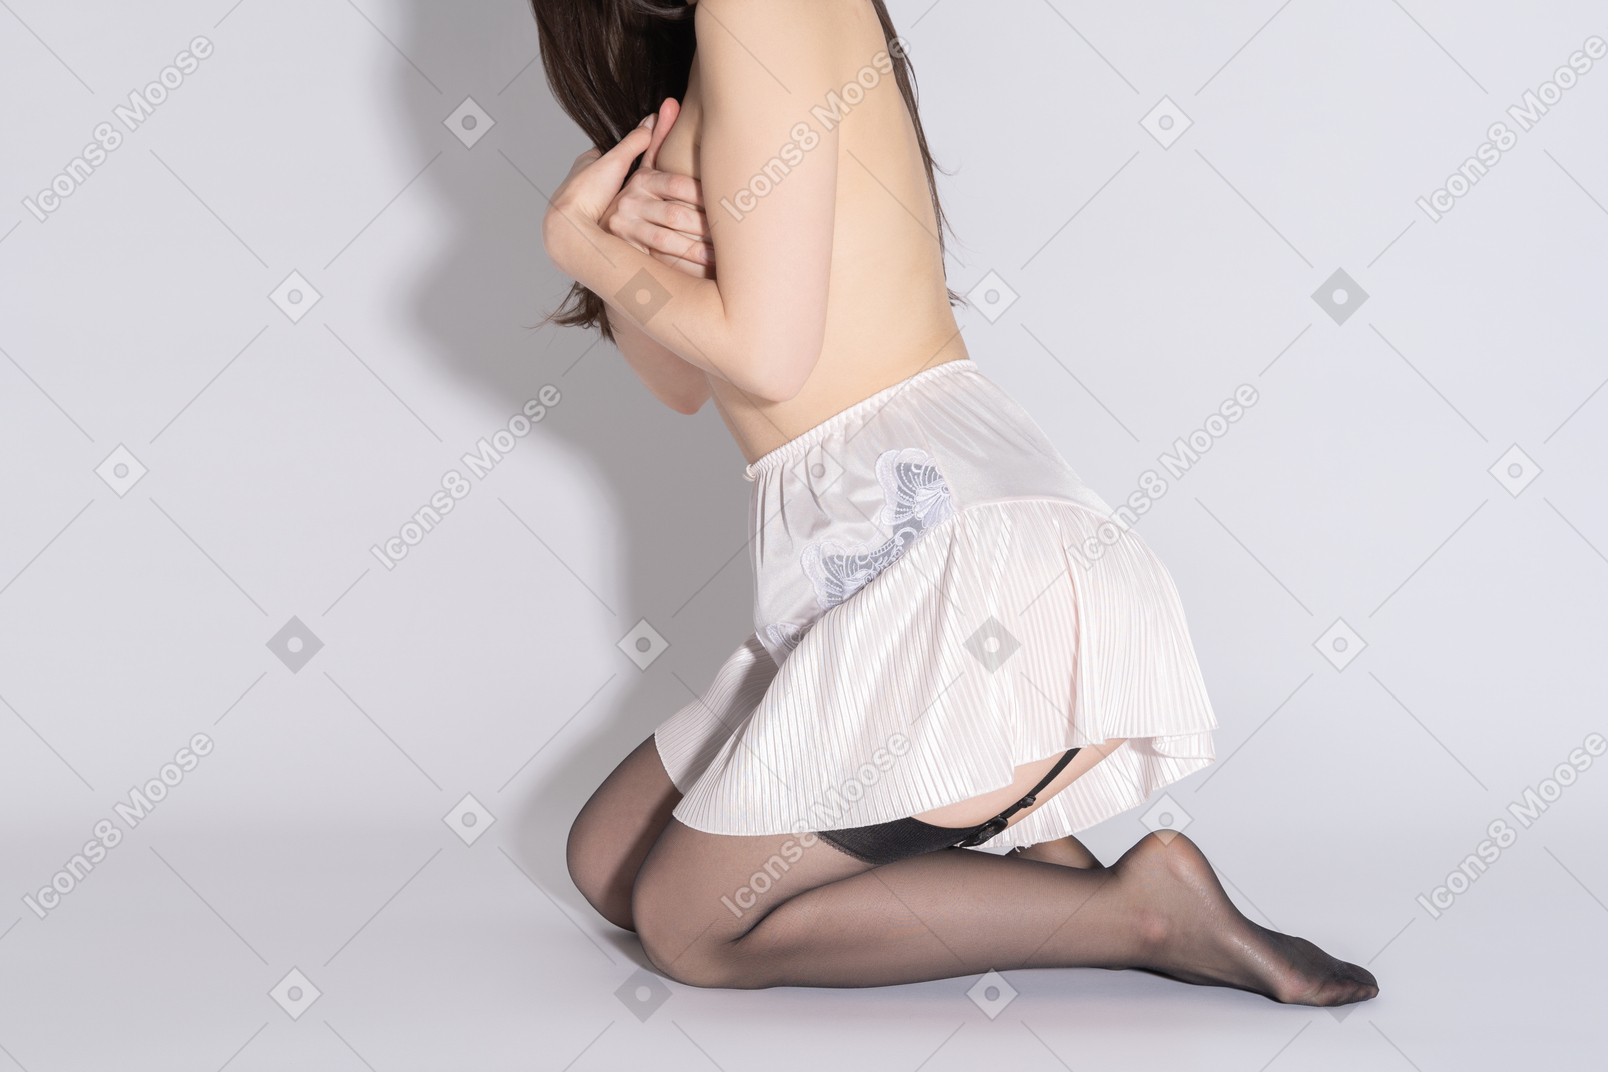 Unrecognizable topless female posing down on her knees